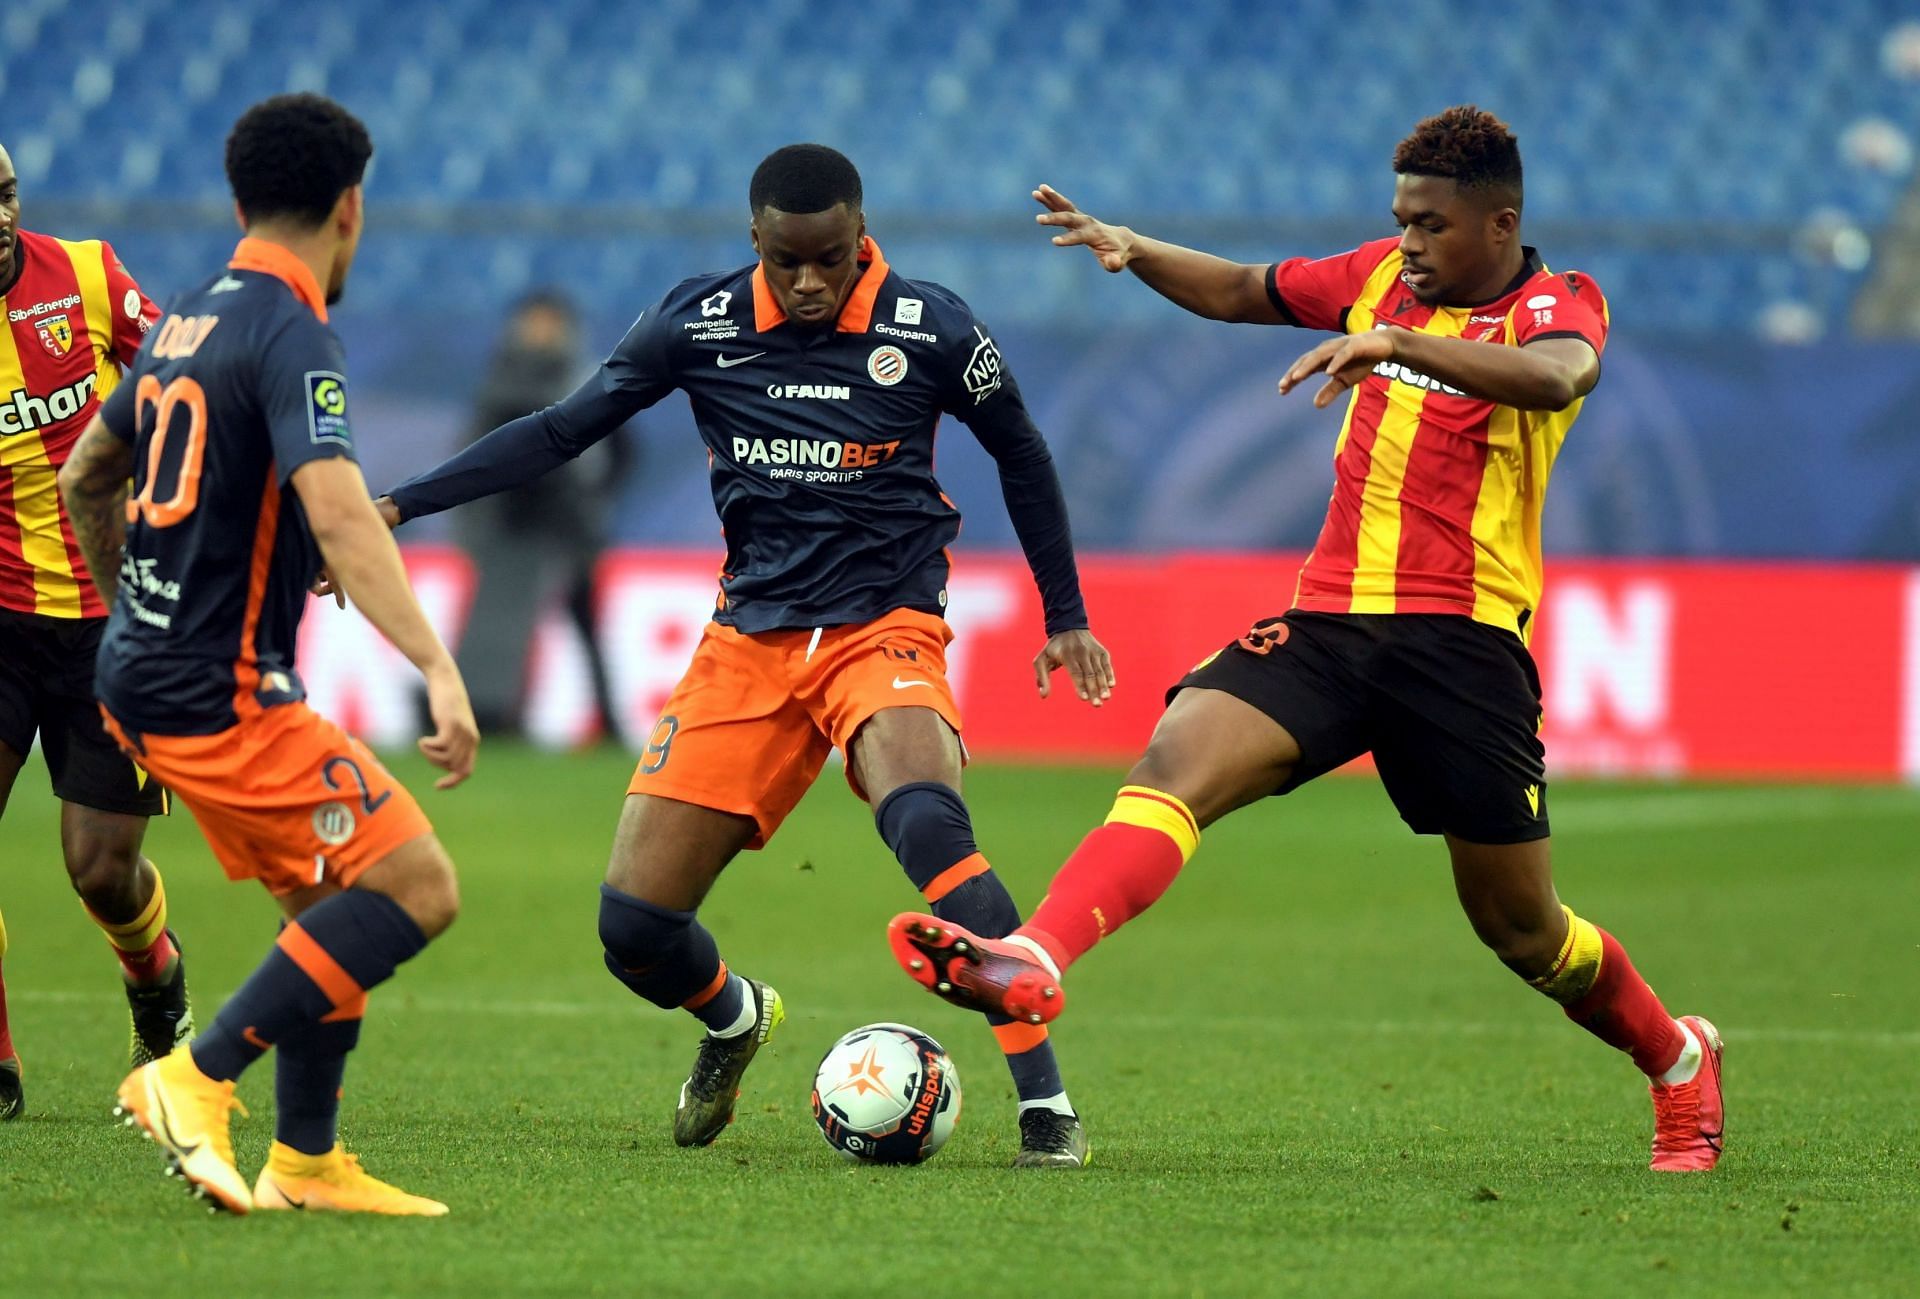 Montpellier take on Lens in Ligue 1 on Saturday (Image source: Imgur)